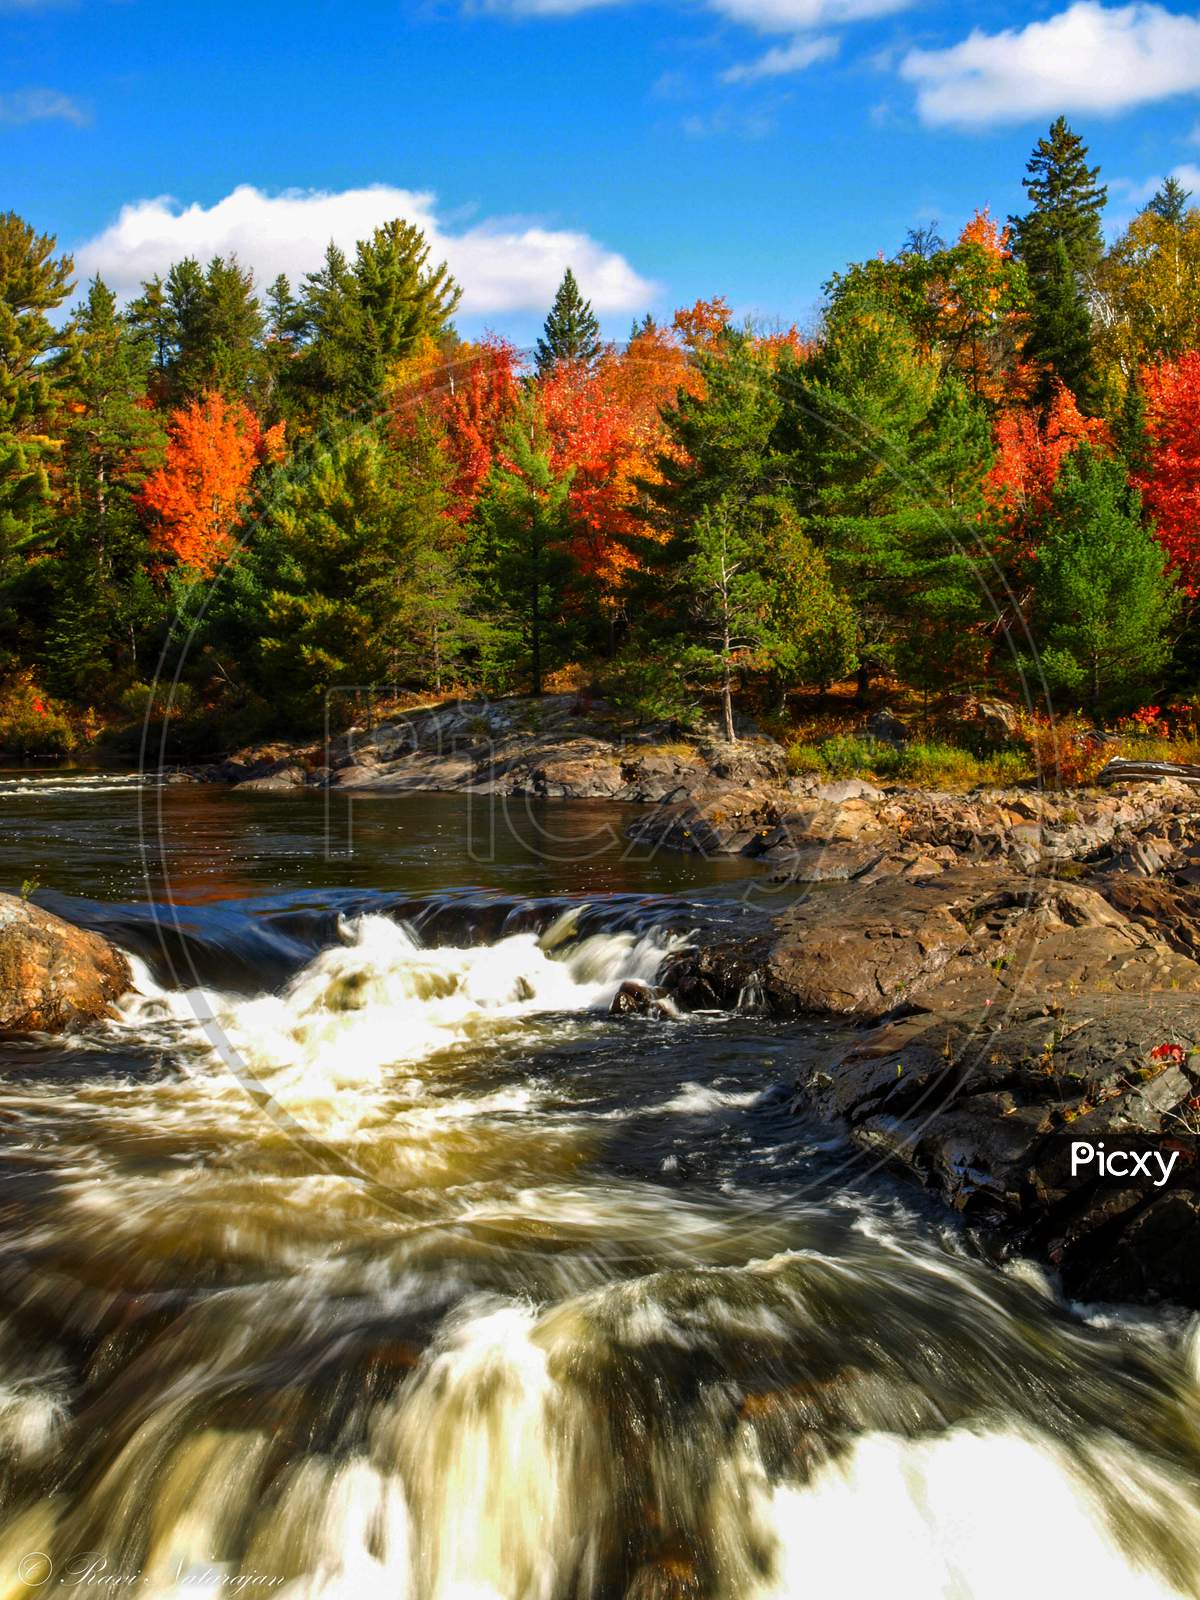 Bright sky, clouds, and fall foliage add to the flowing river, Chutes Prov Park, ON, Canada